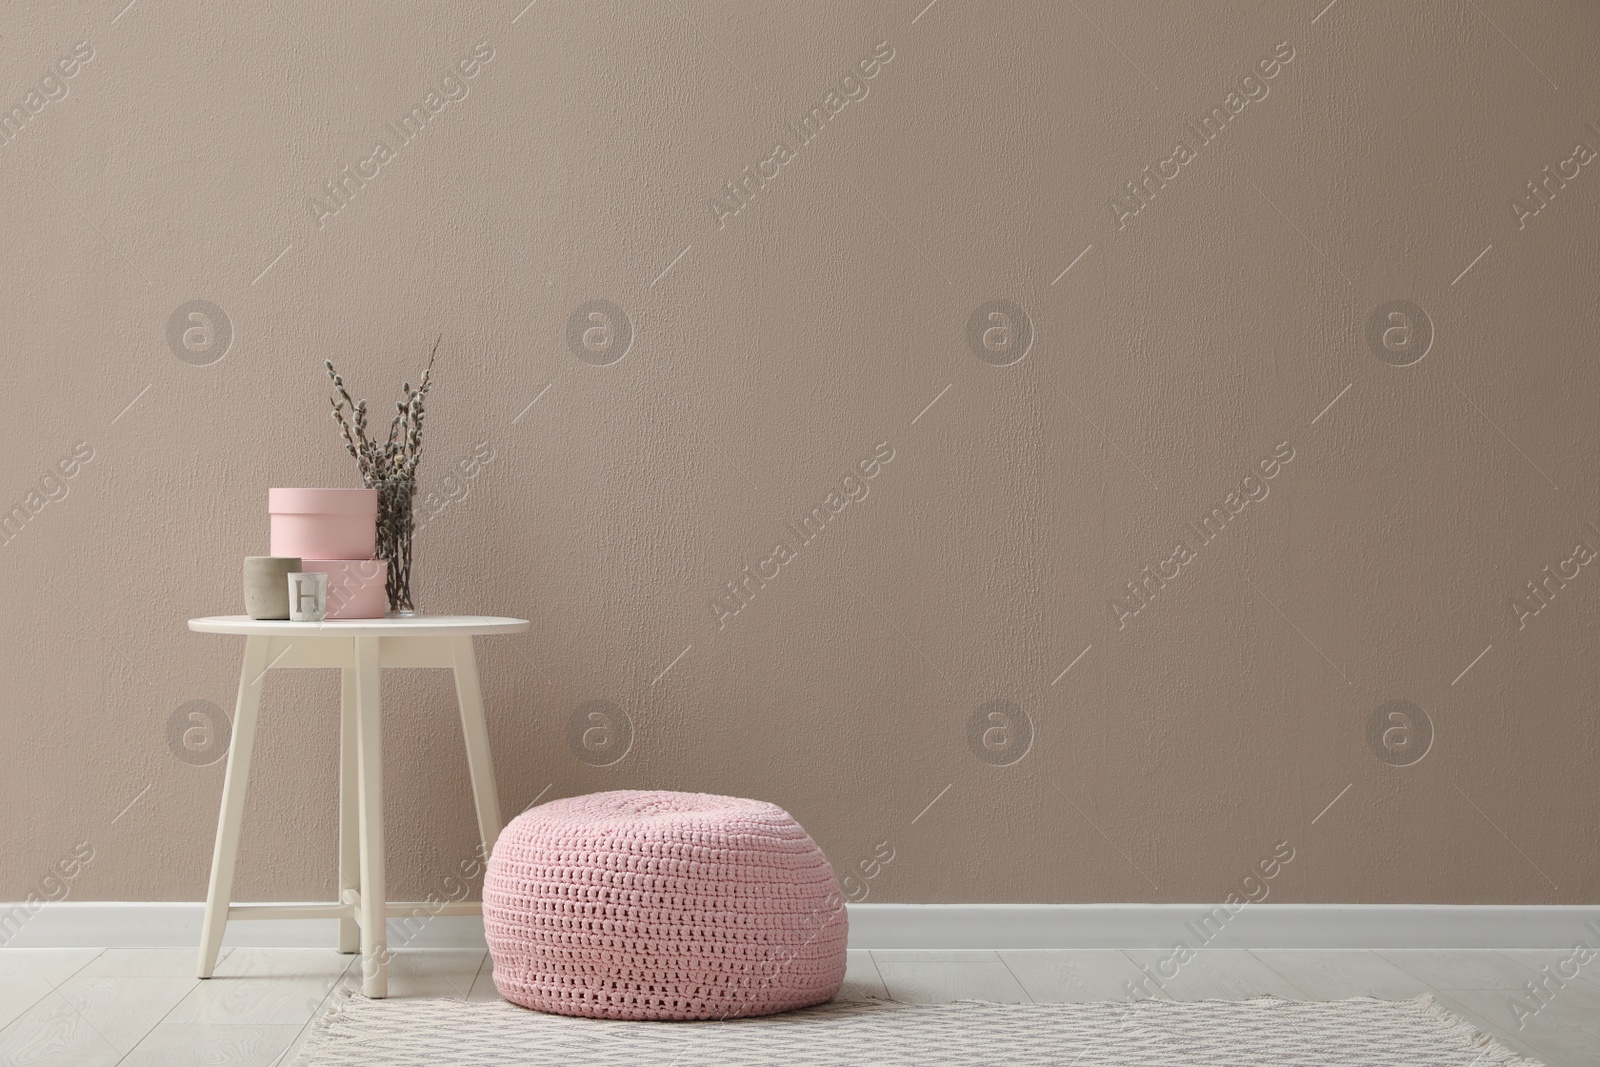 Photo of Knitted pouf and decor elements near beige wall indoors. Space for text